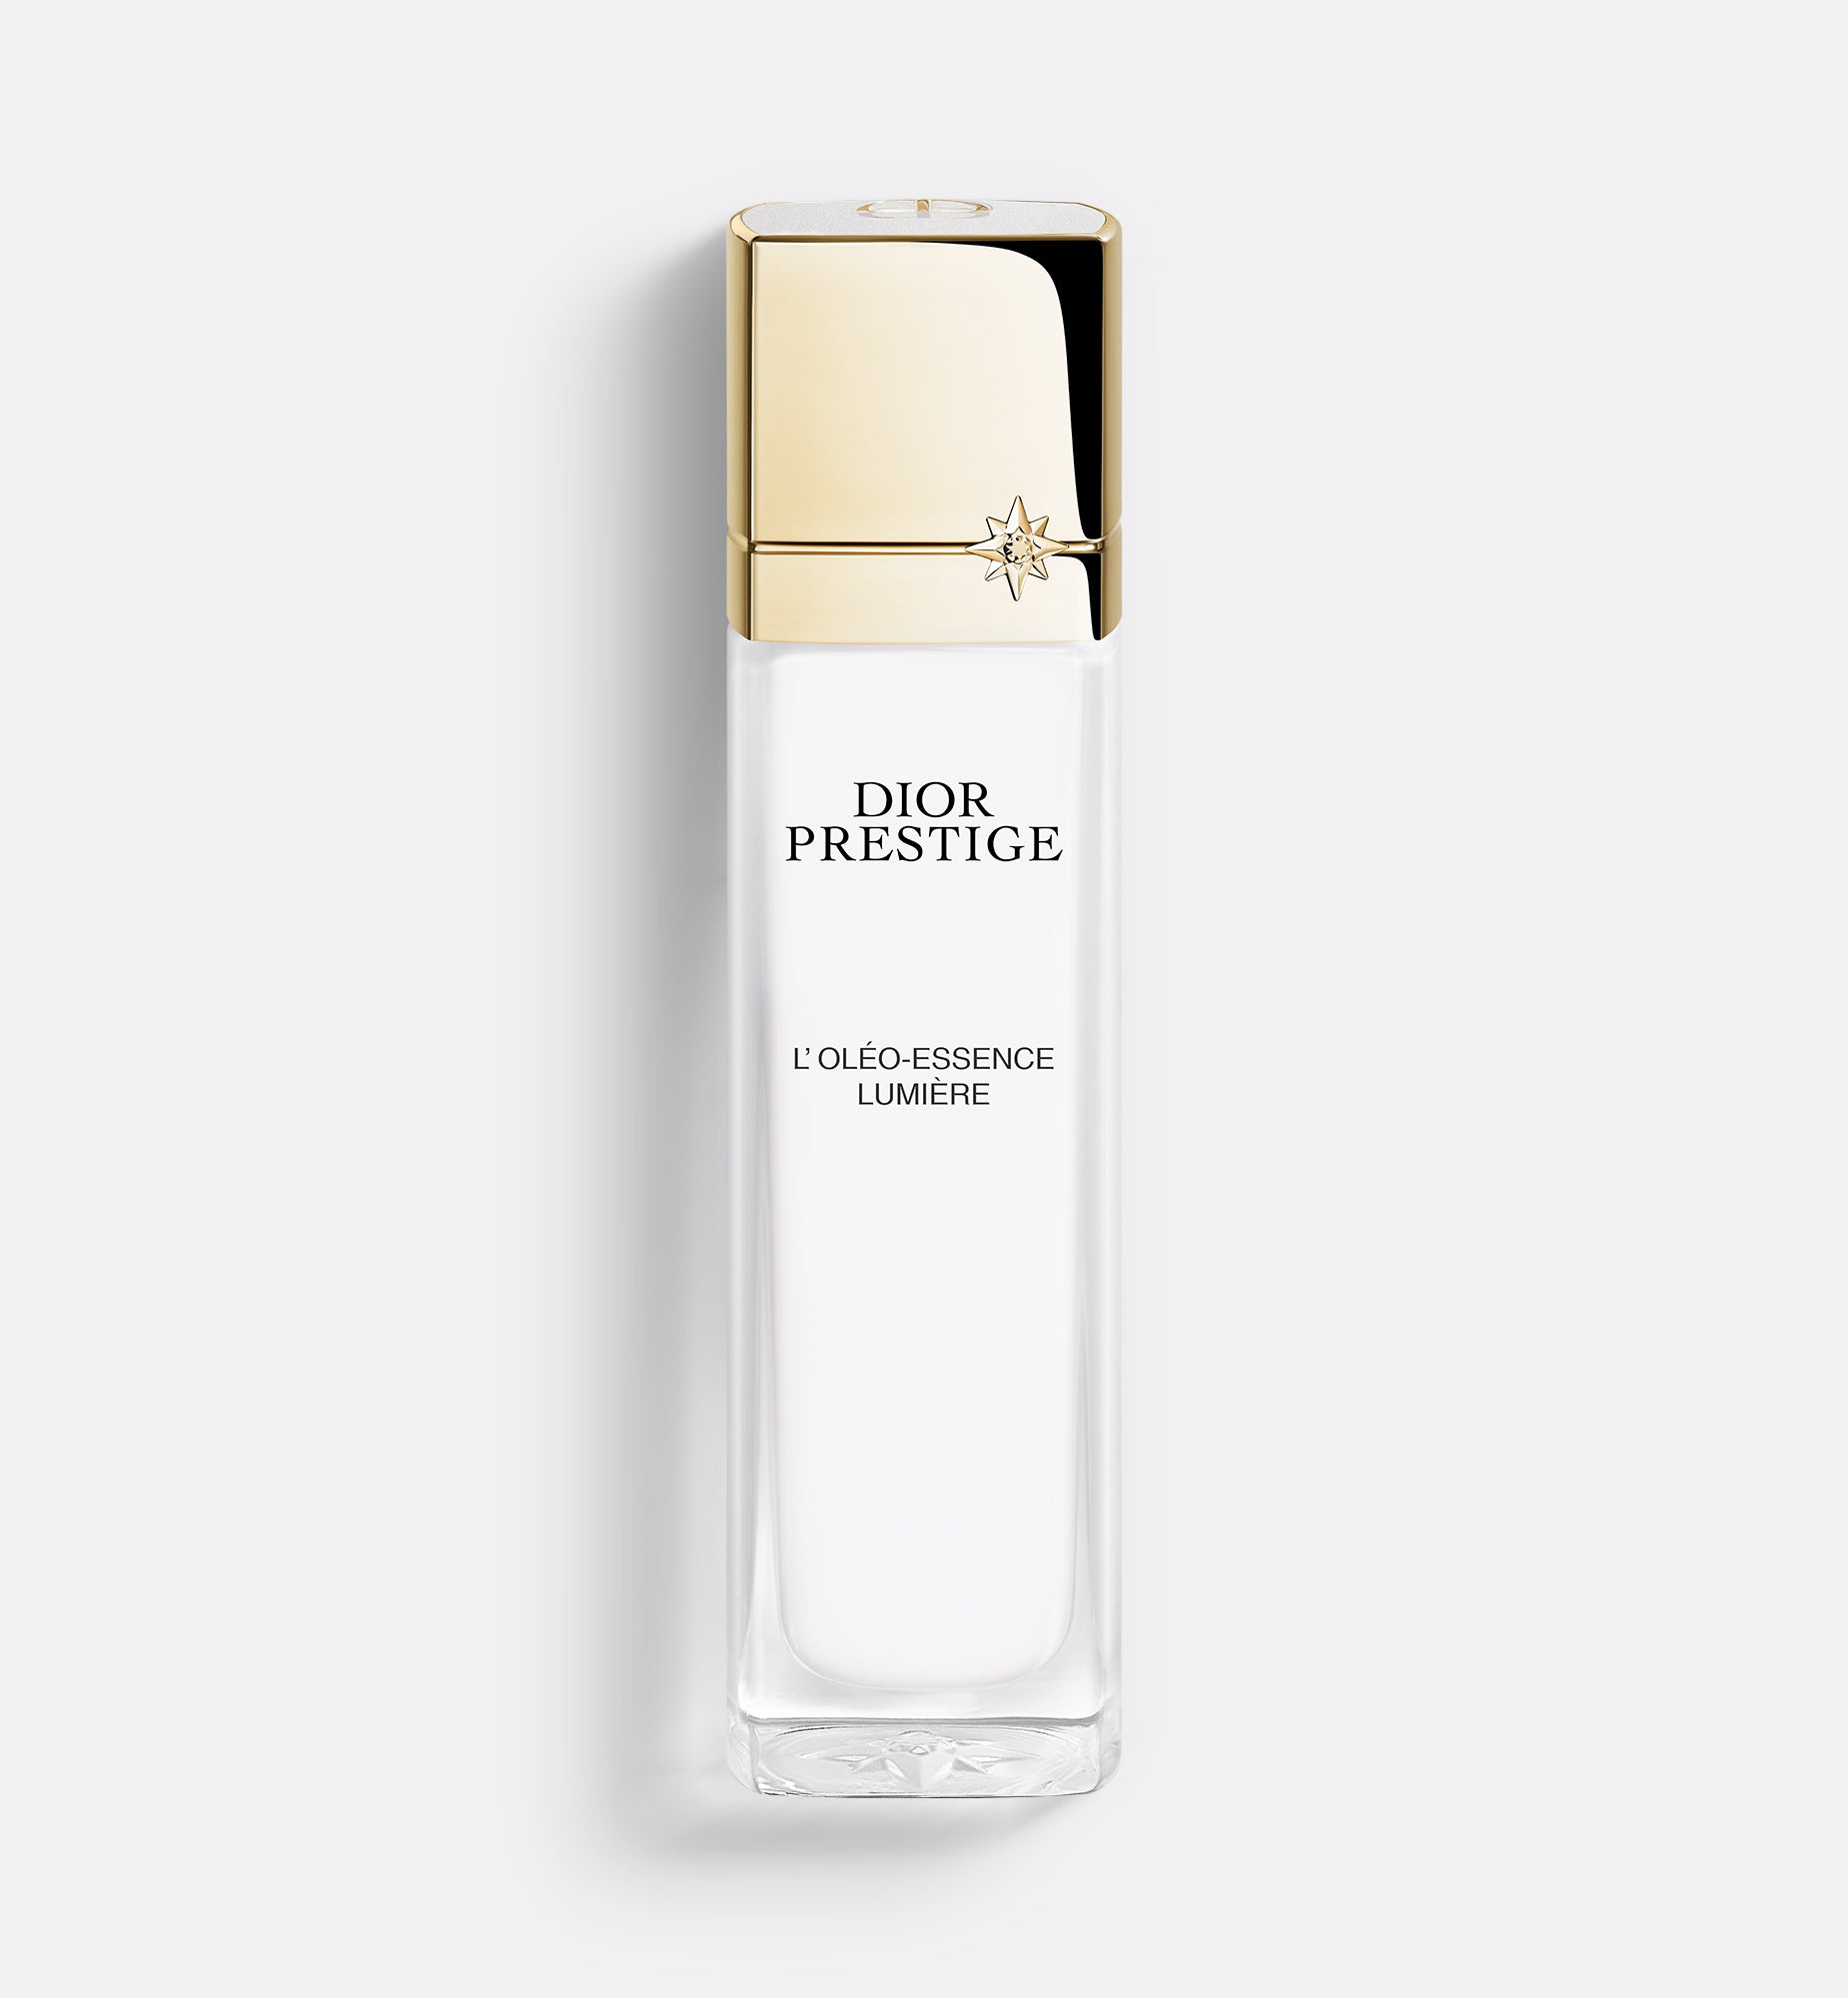 Dior Prestige L’Oléo-Essence Lumière | Exfoliating and Brightening Lotion - Face and Neck